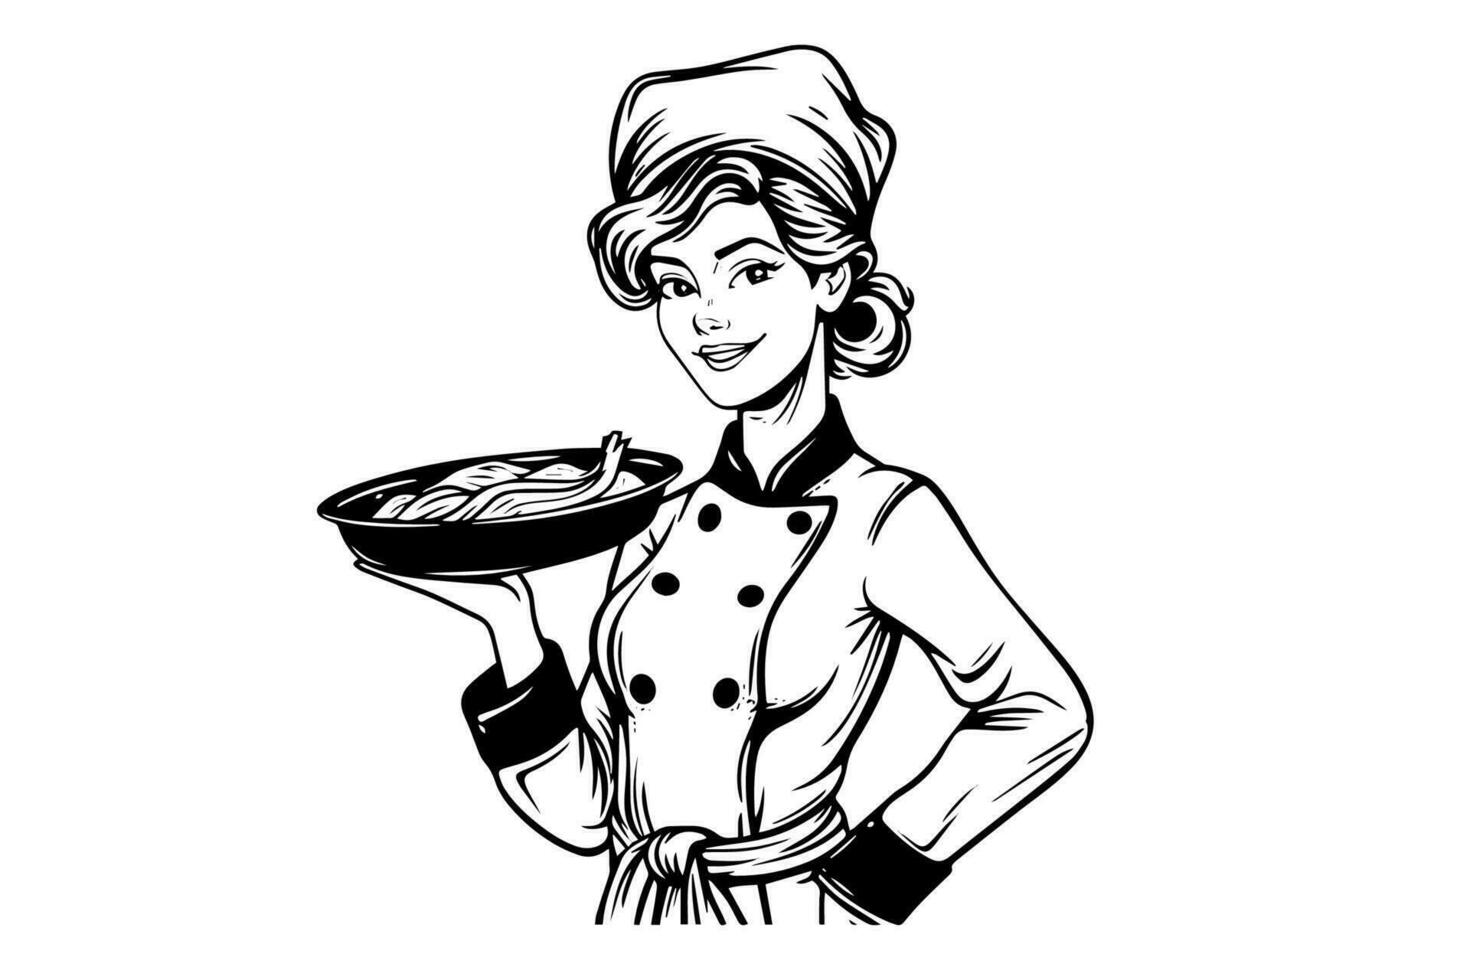 Smiley woman chef ink sketch in engraving style.  Drawing young female vector illustration.